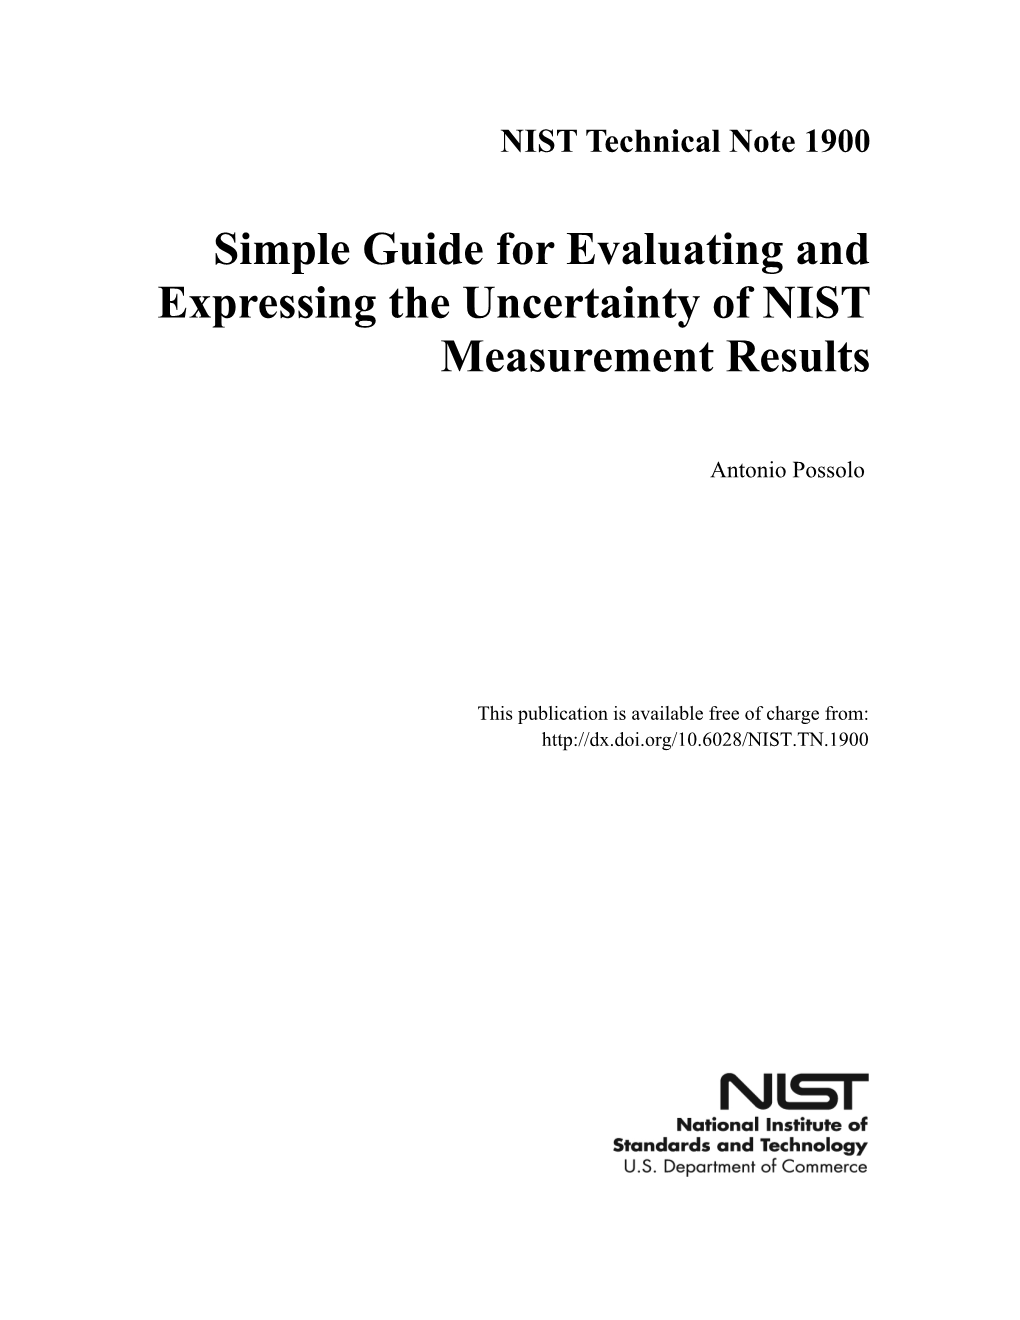 Simple Guide for Evaluating and Expressing the Uncertainty of NIST Measurement Results